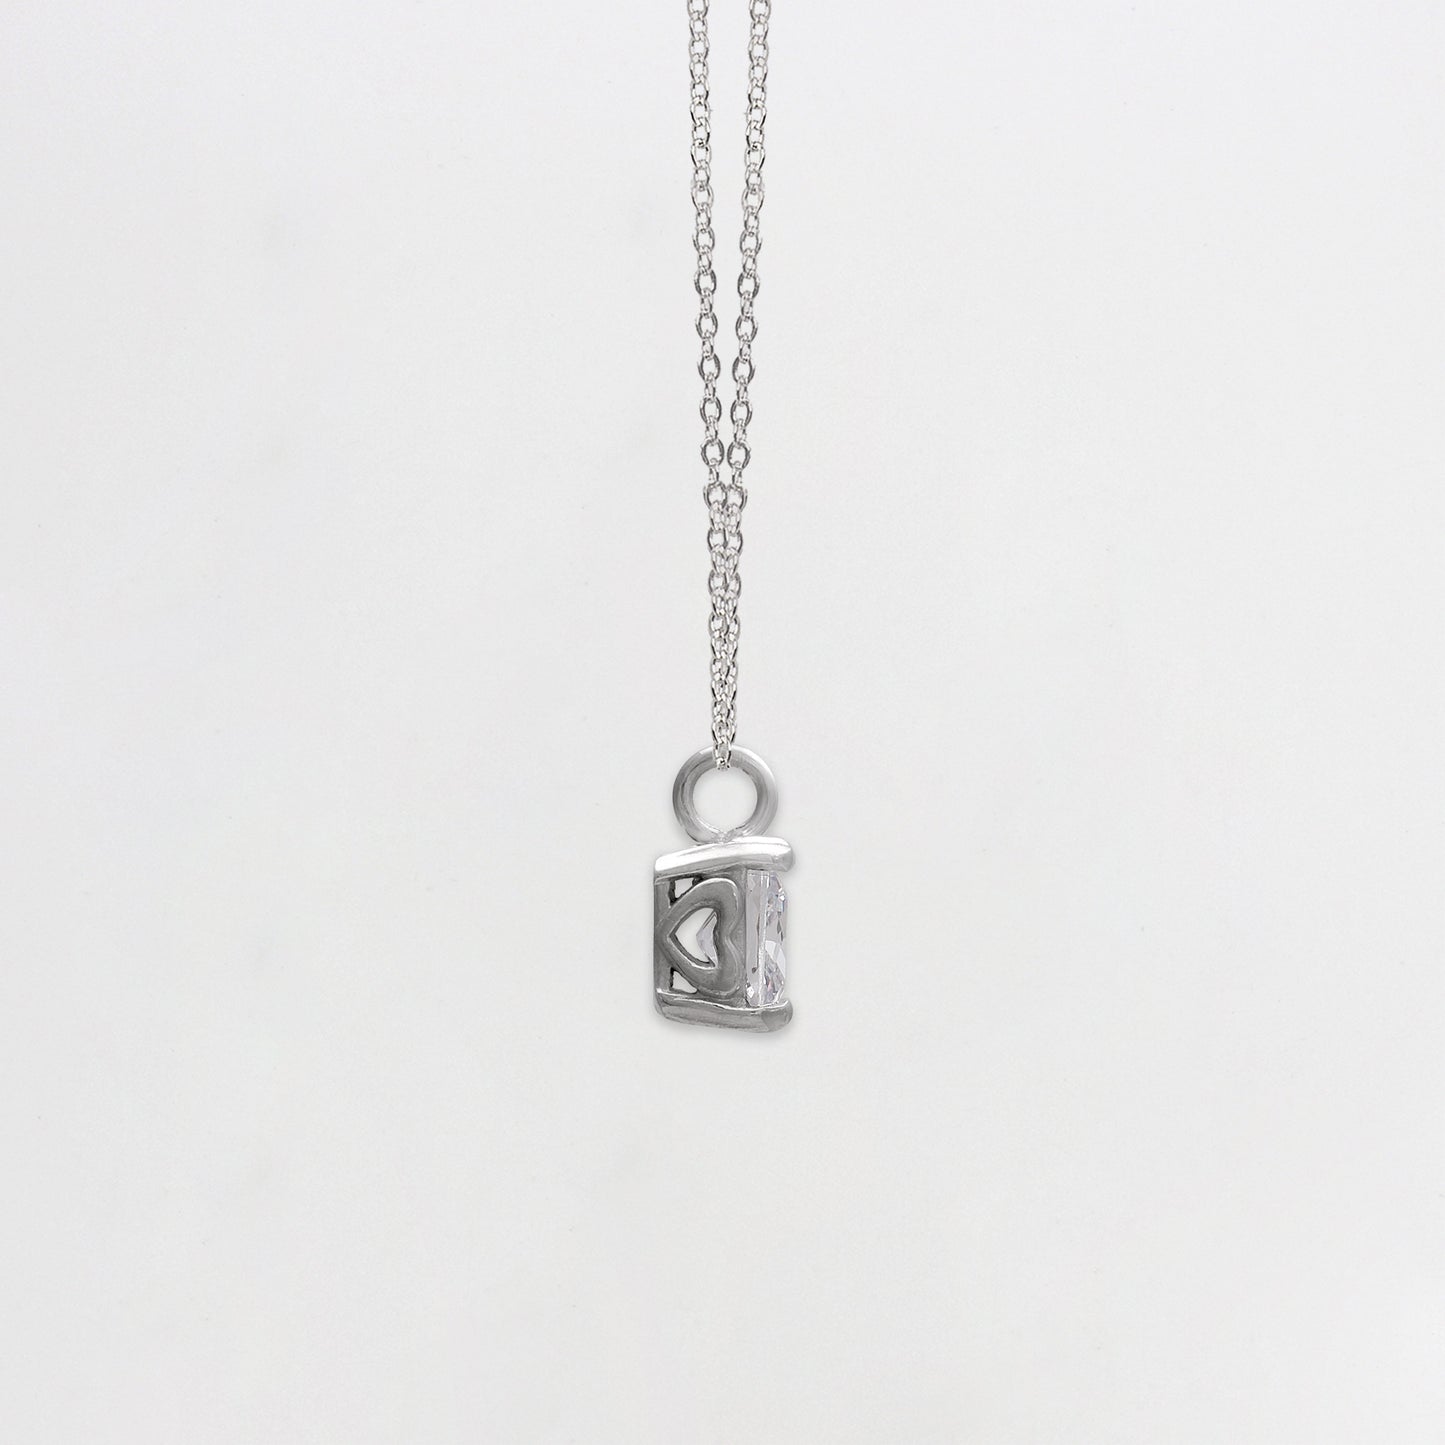 Silver Zircon Square Pendant with Link Chain